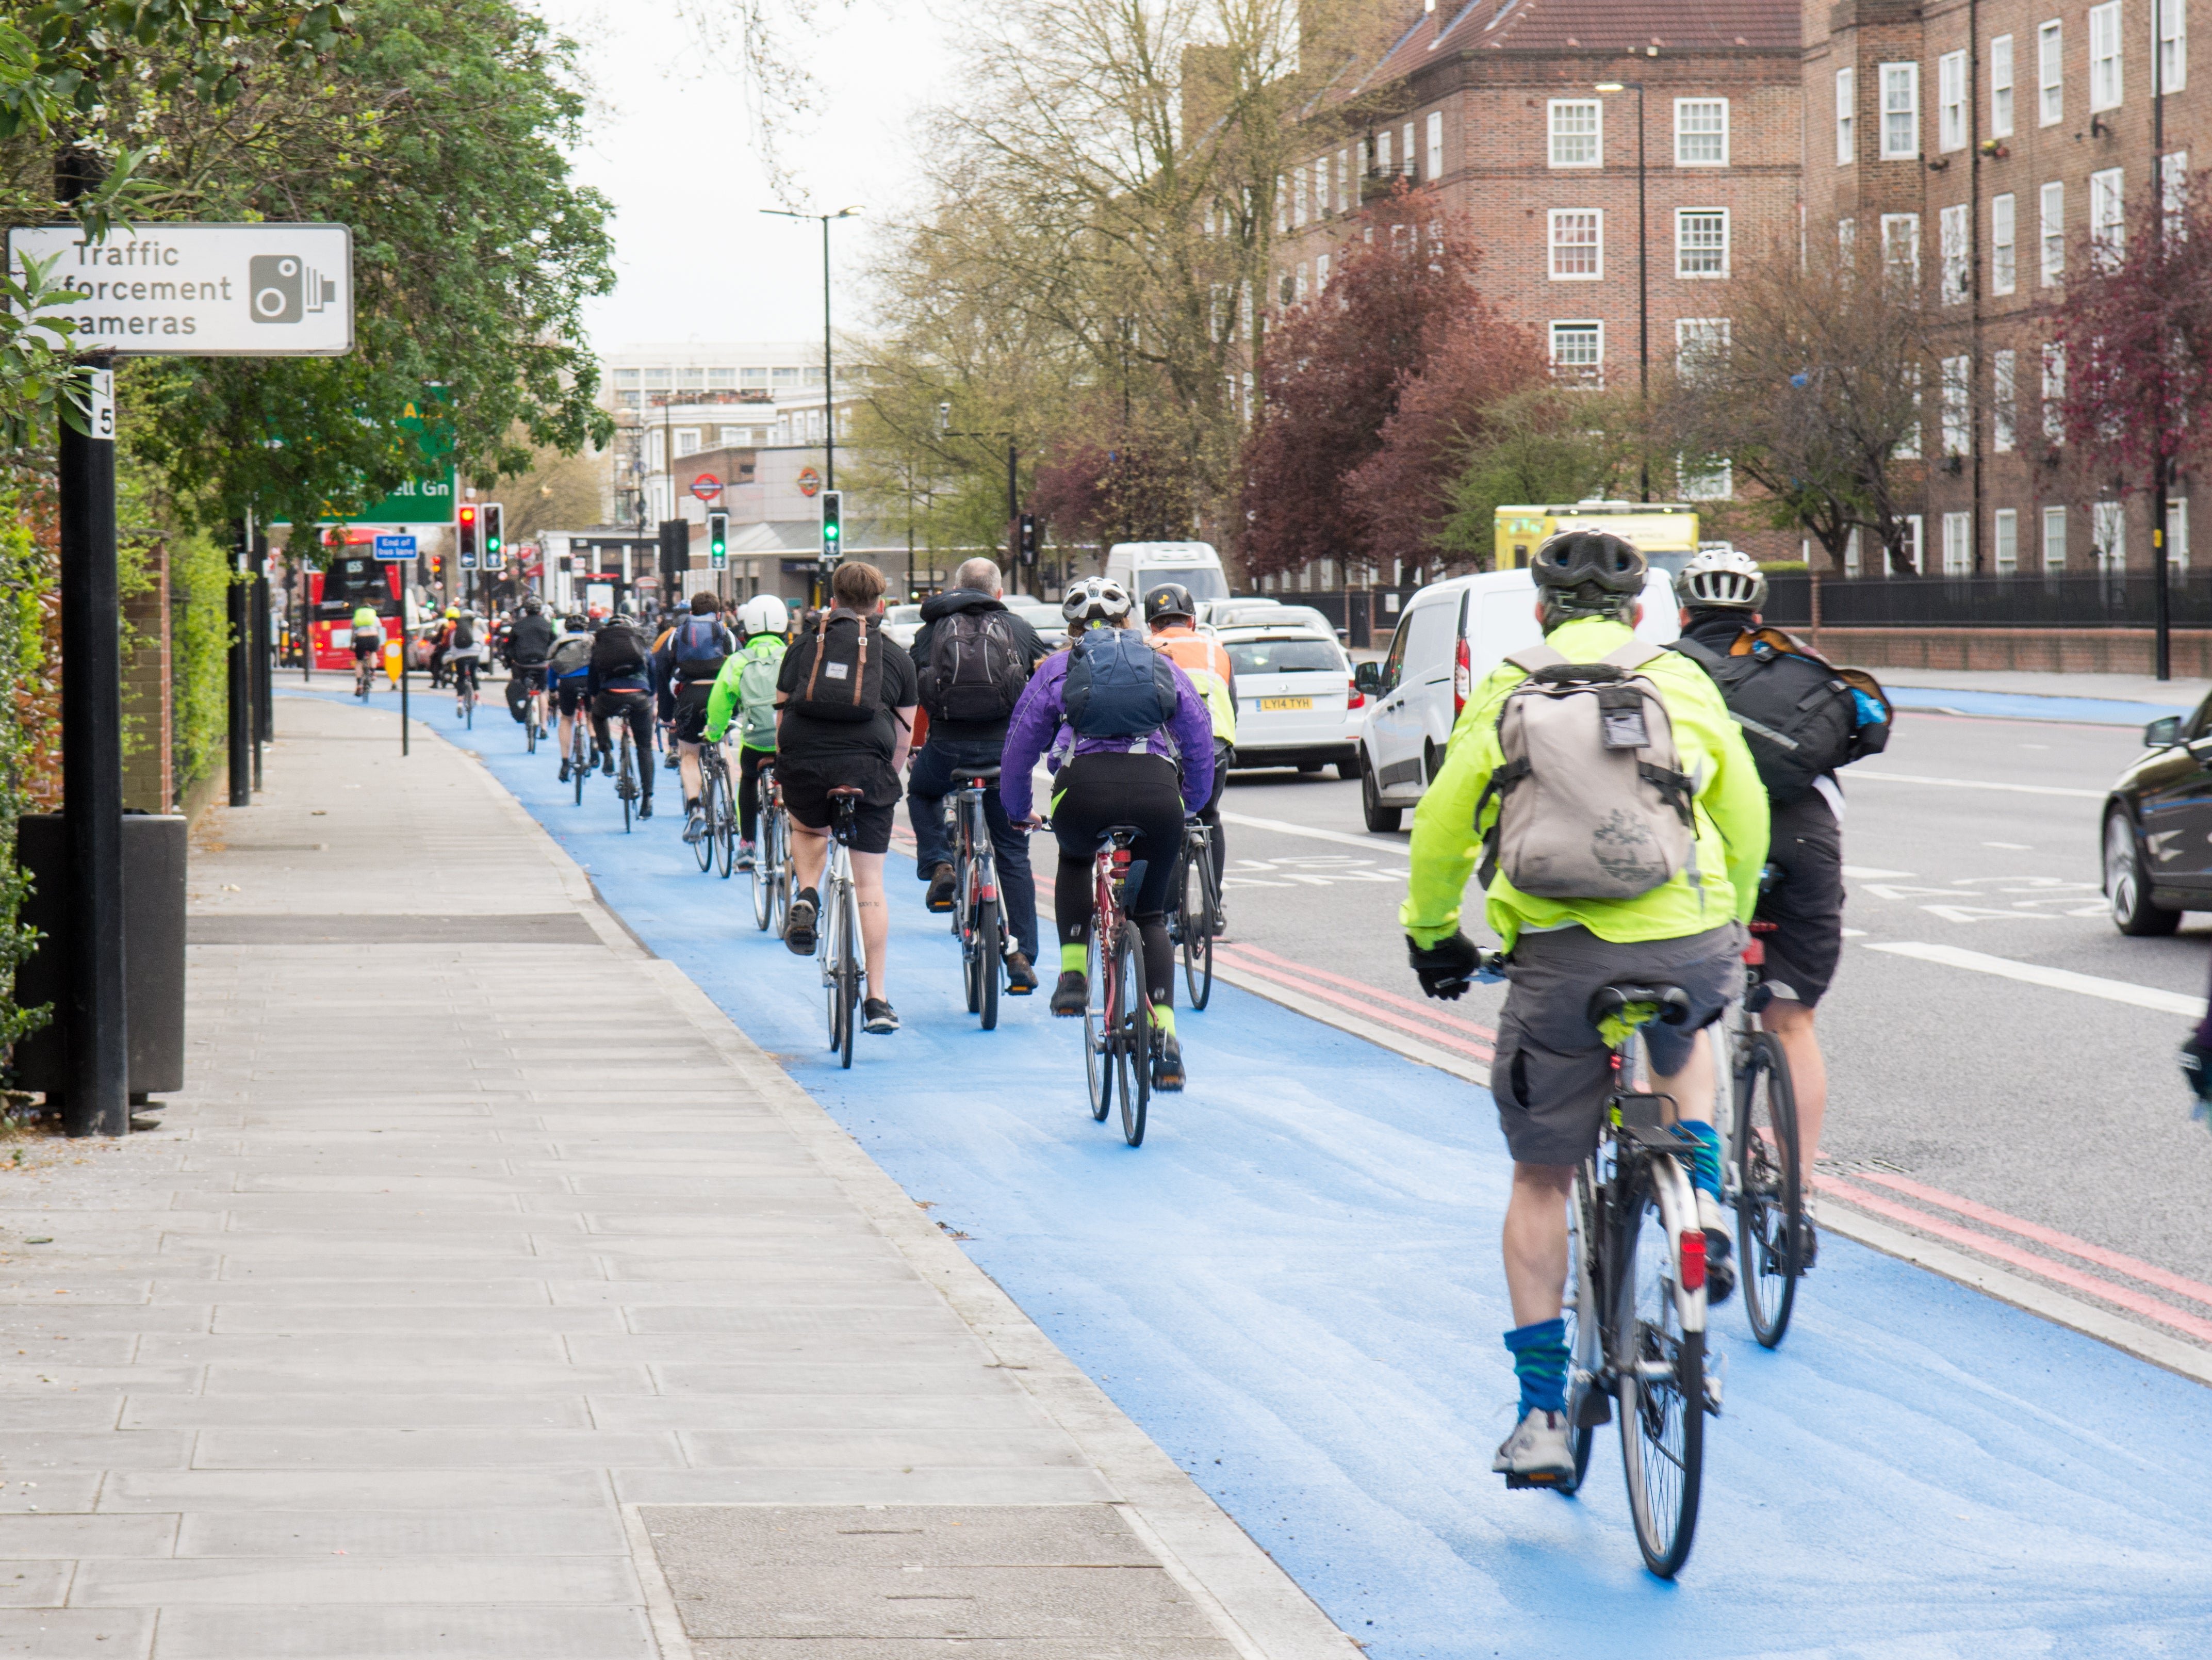 An increase in cycle lanes during the coronavirus pandemic contributed to London becoming the world’s most congested city, according to new analysis